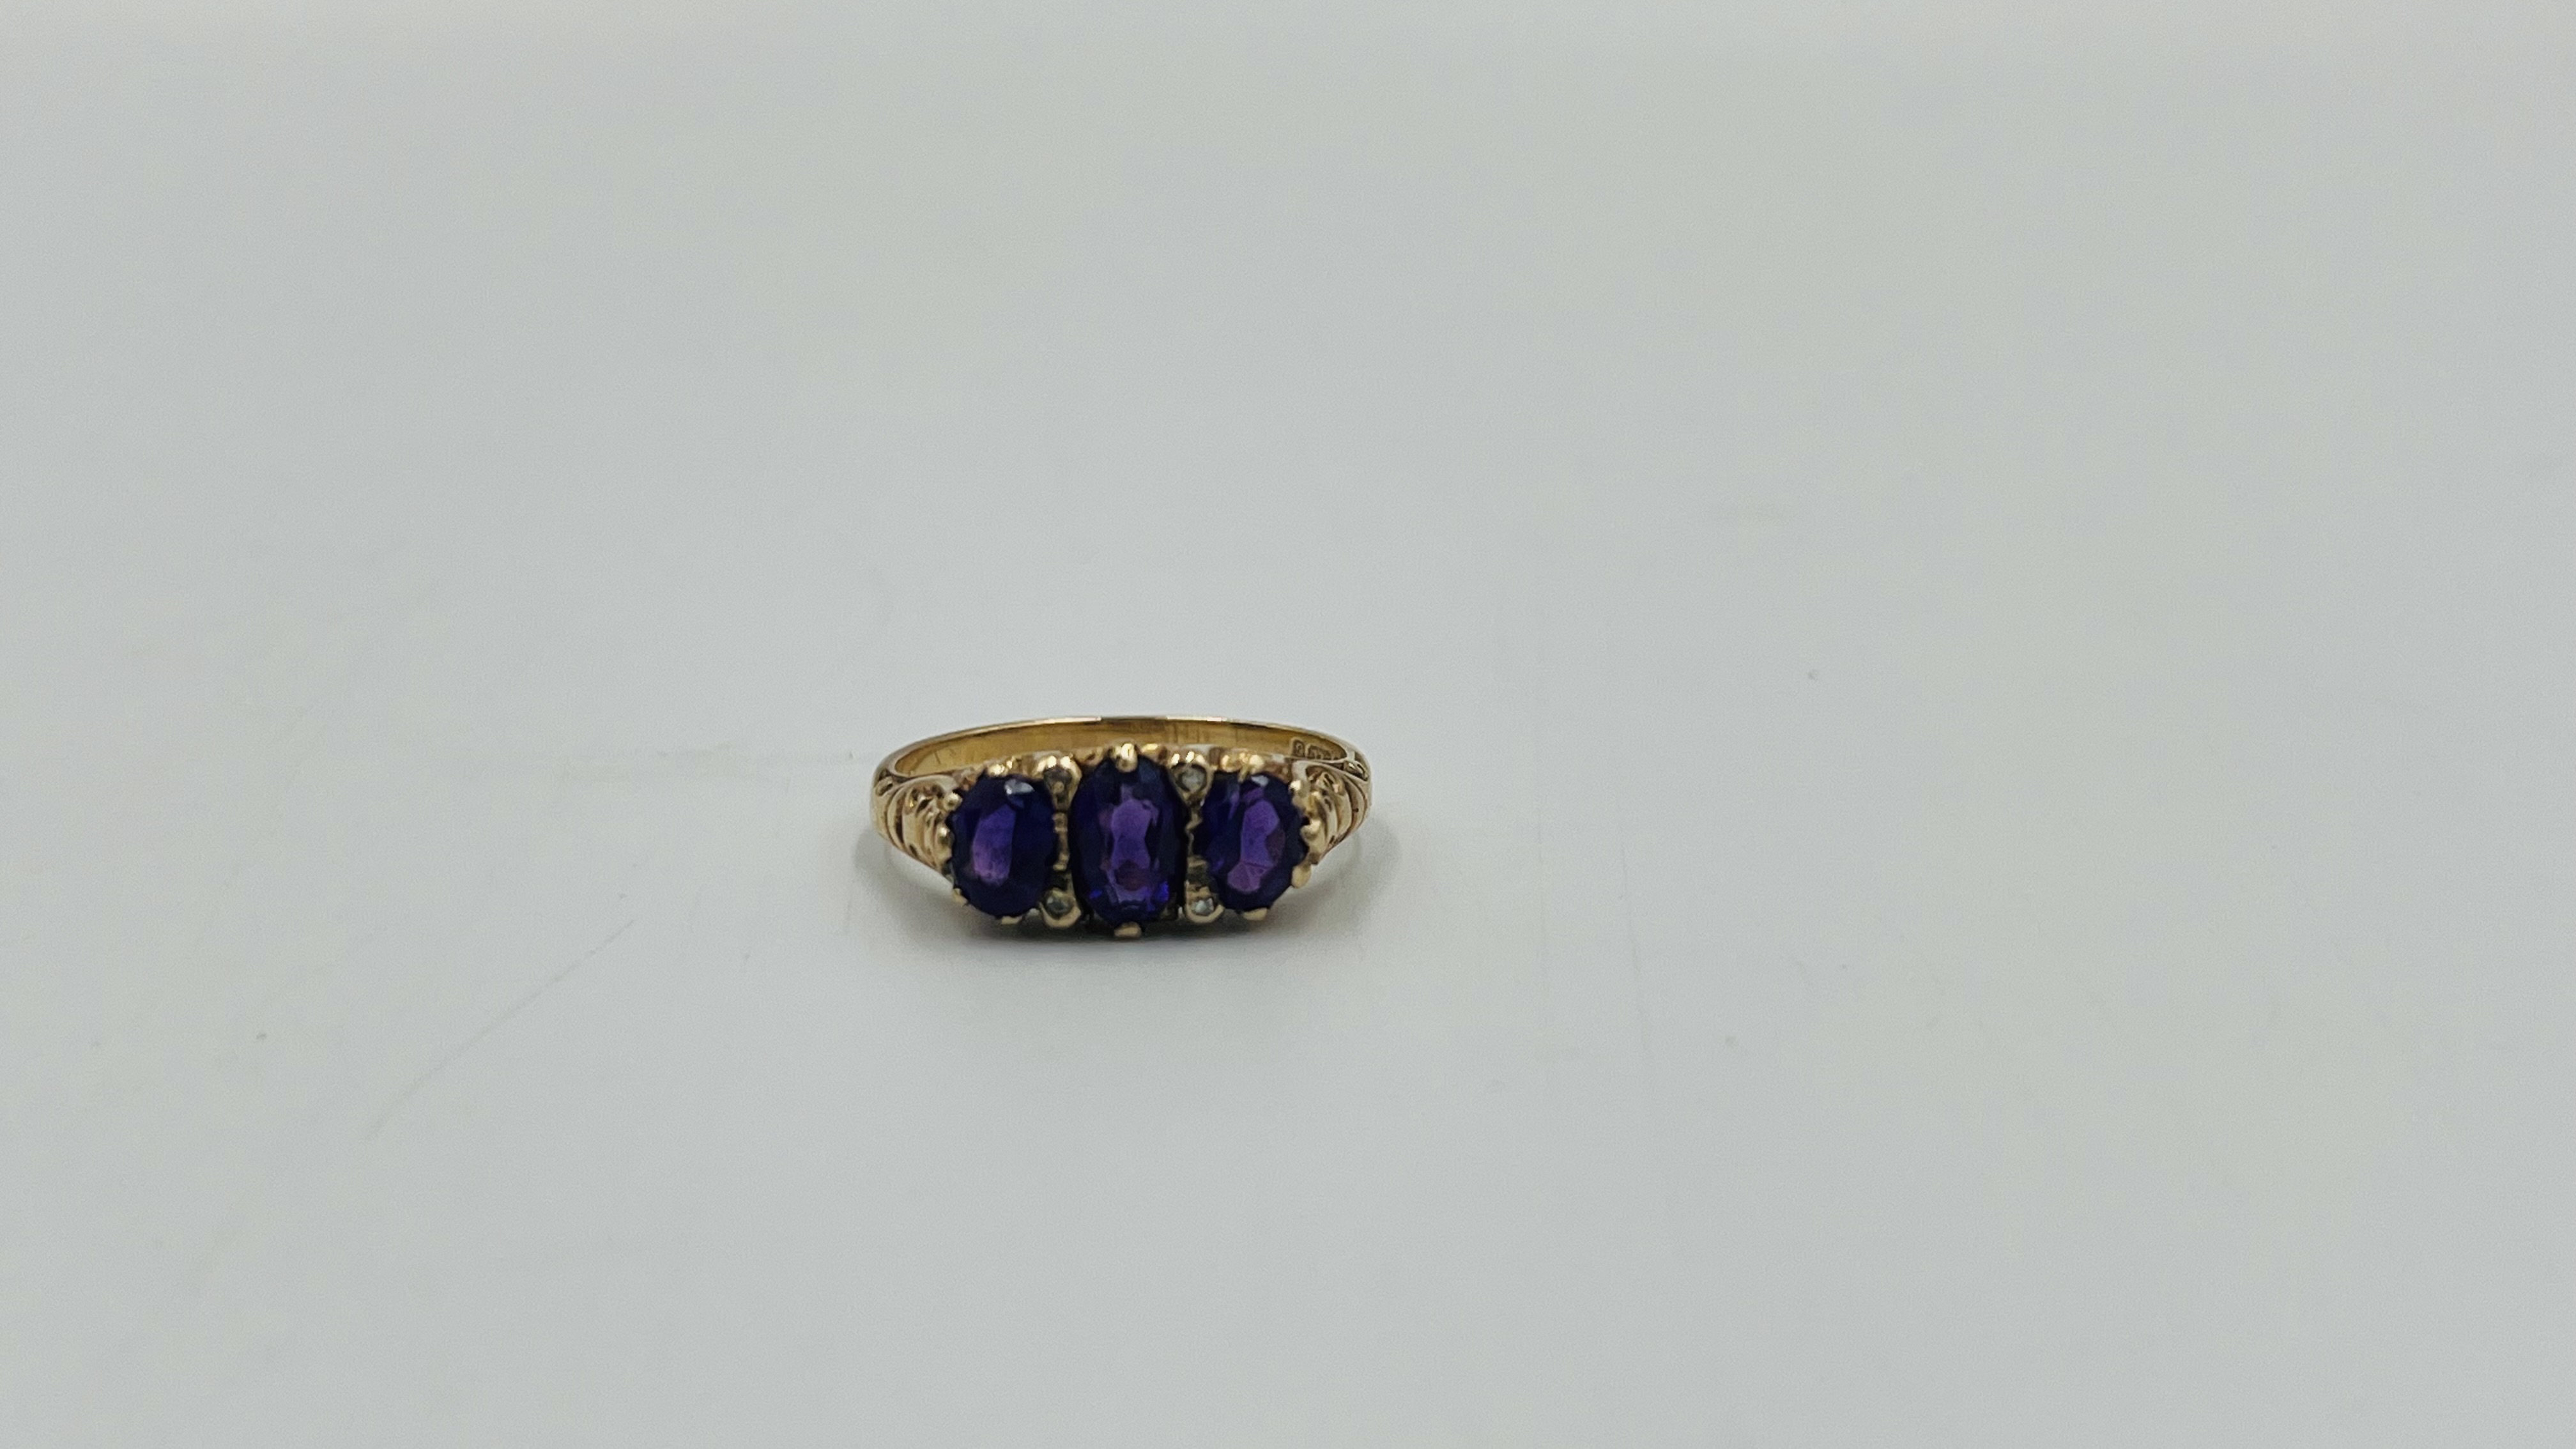 9ct gold ring set with three amethysts - Image 2 of 5